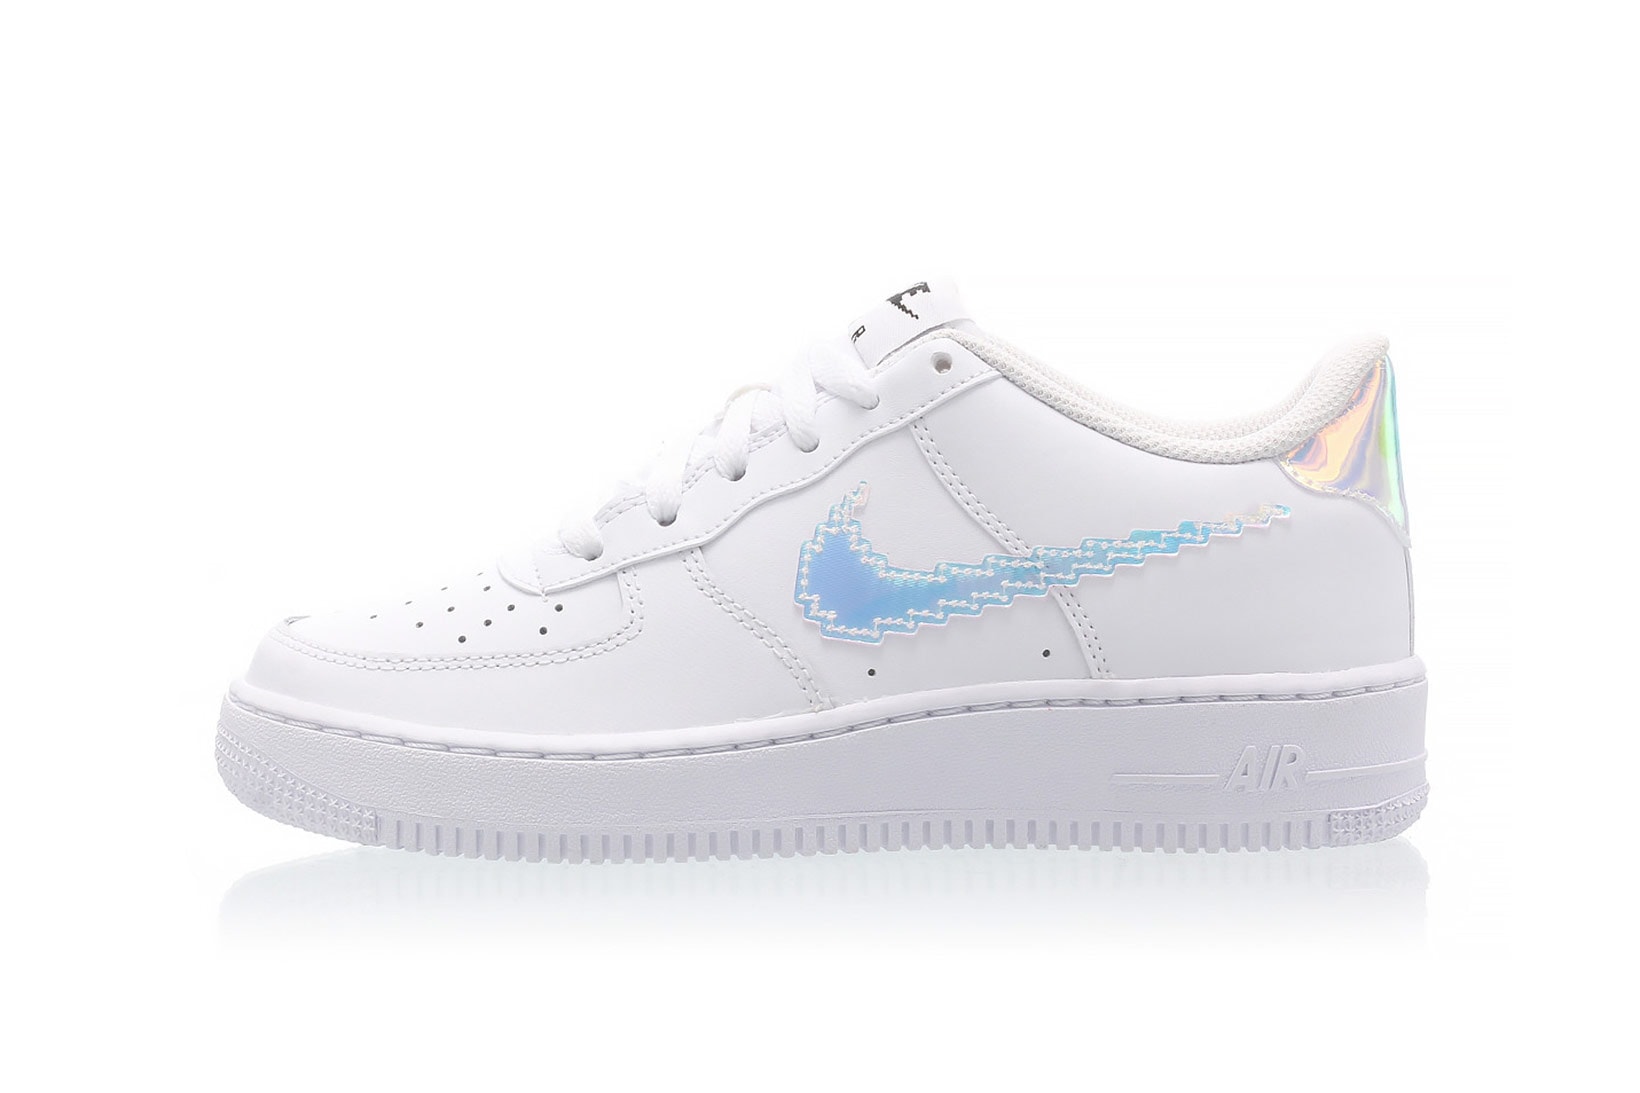 nike air force 1 af1 lv8 sneakers digital iridescent swoosh white colorway footwear shoes lateral